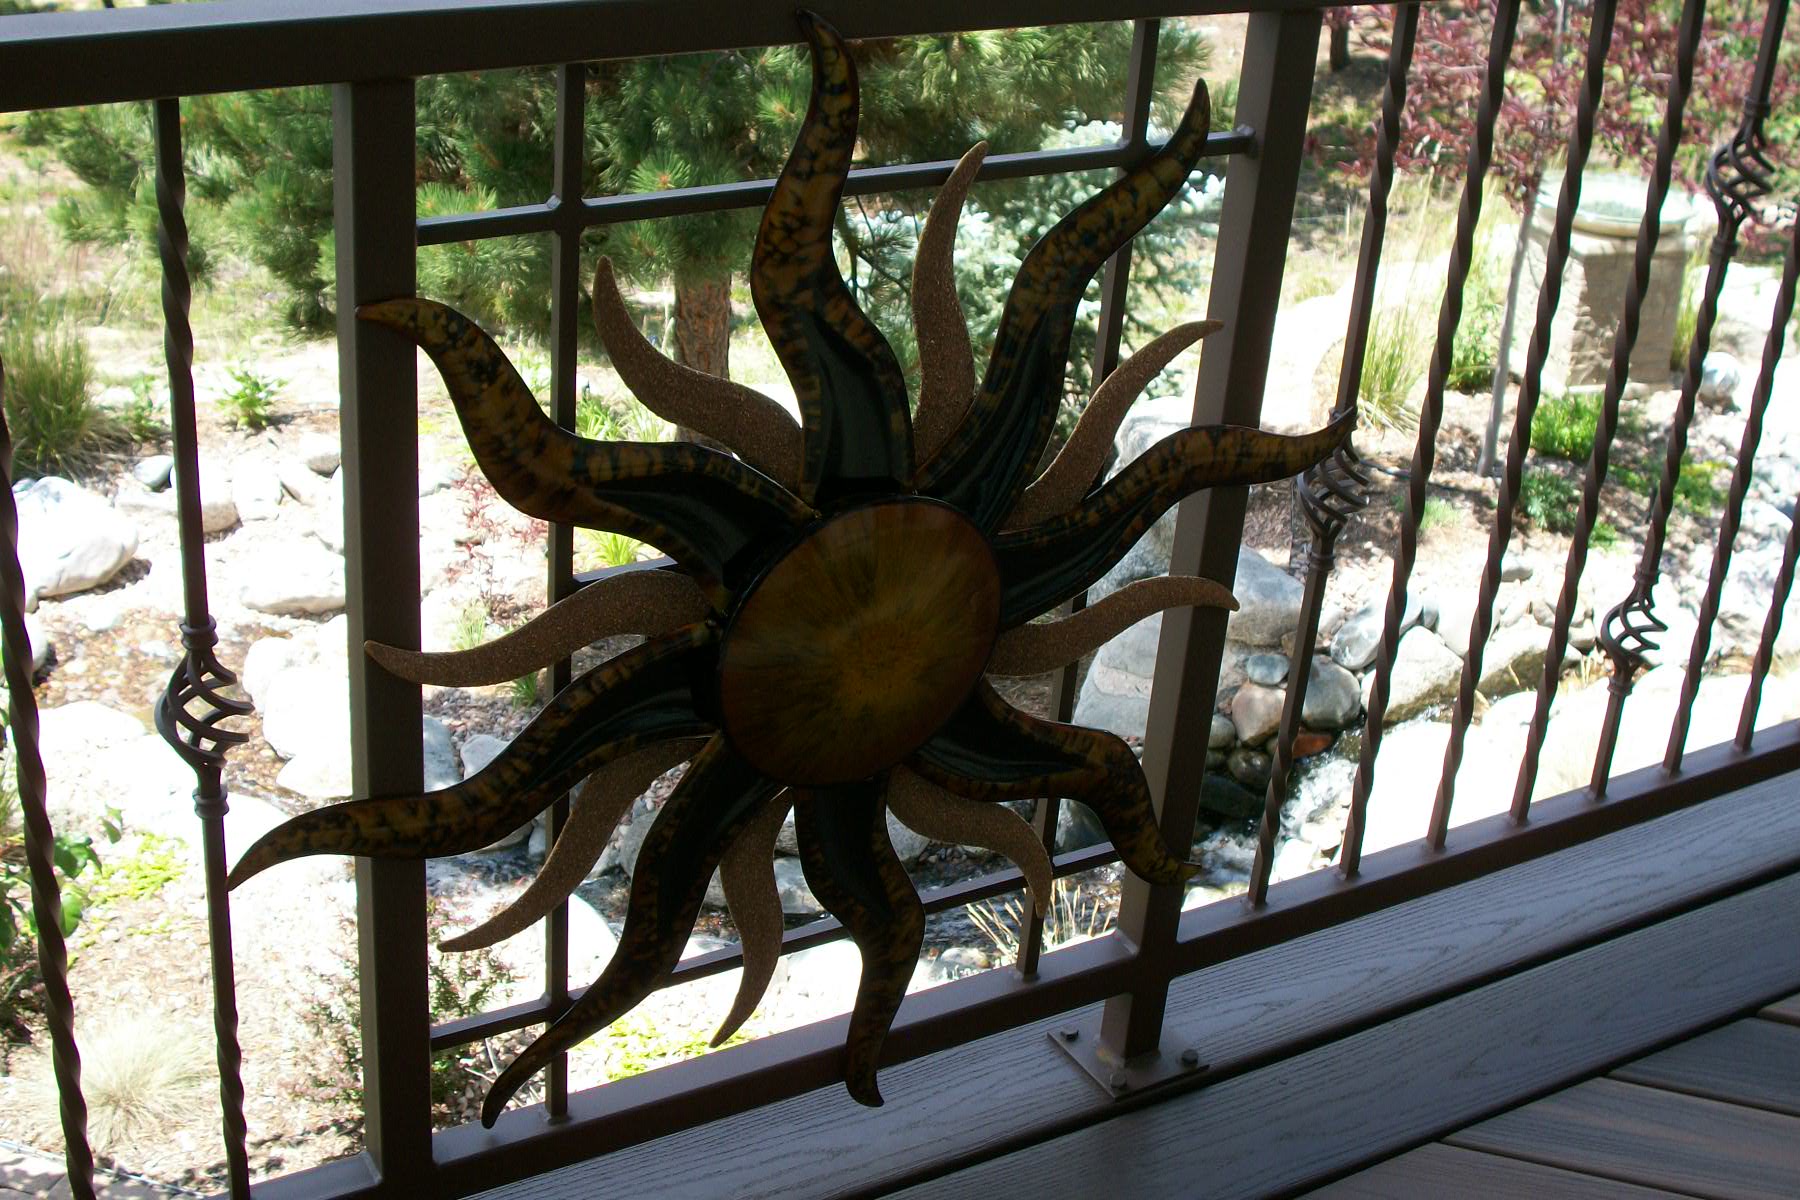 The owners asked us to incorporated a unique piece of metal art into the deck railing